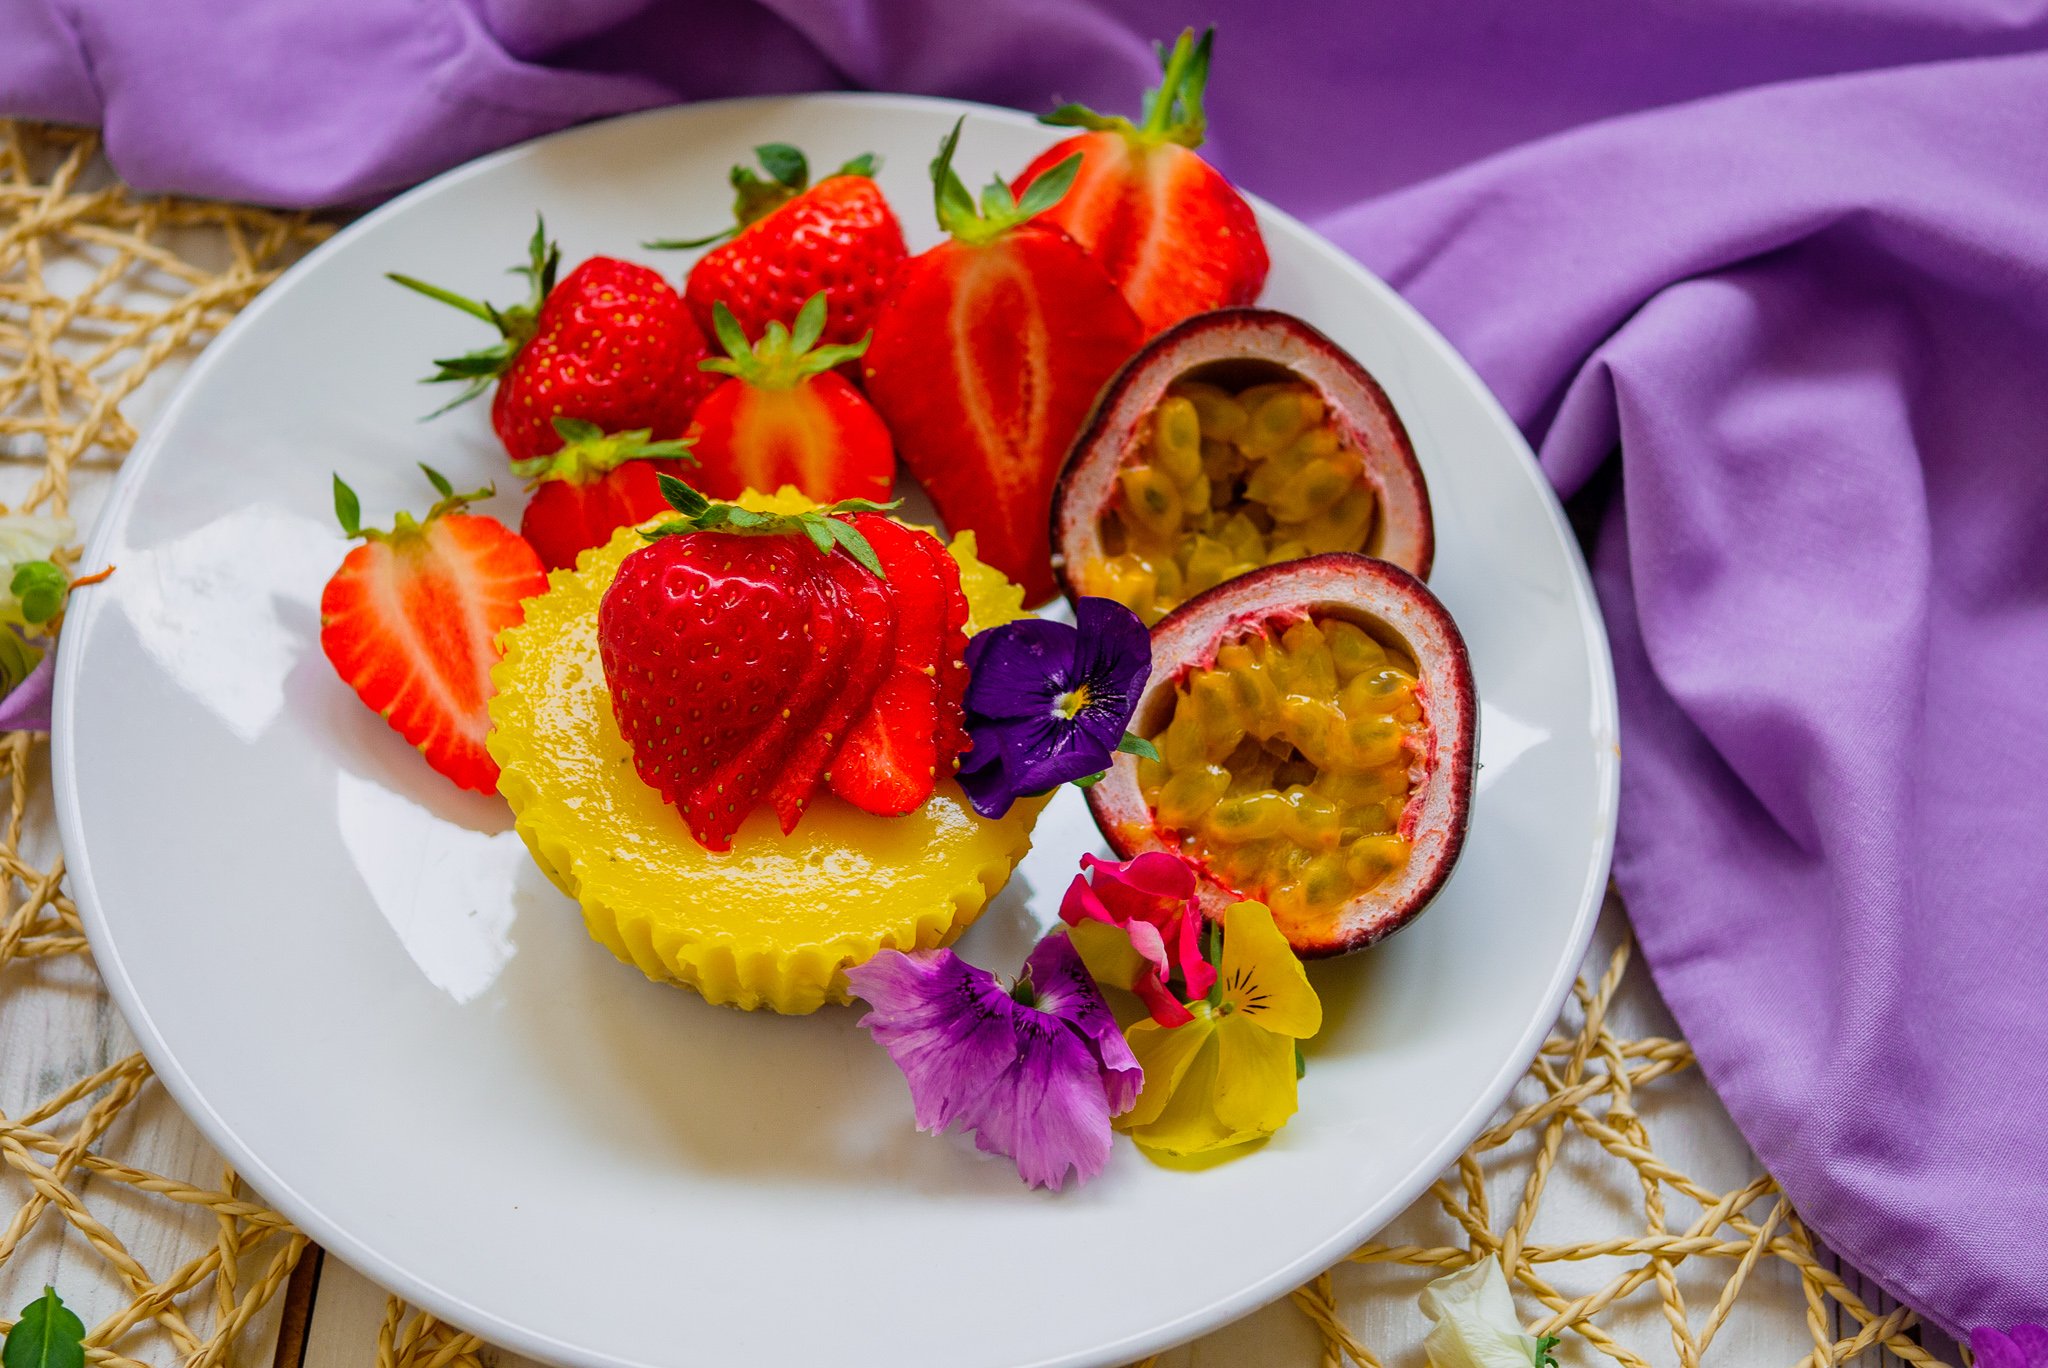 gluten and dairy free fruit tart by kam sokhi allergy chef 